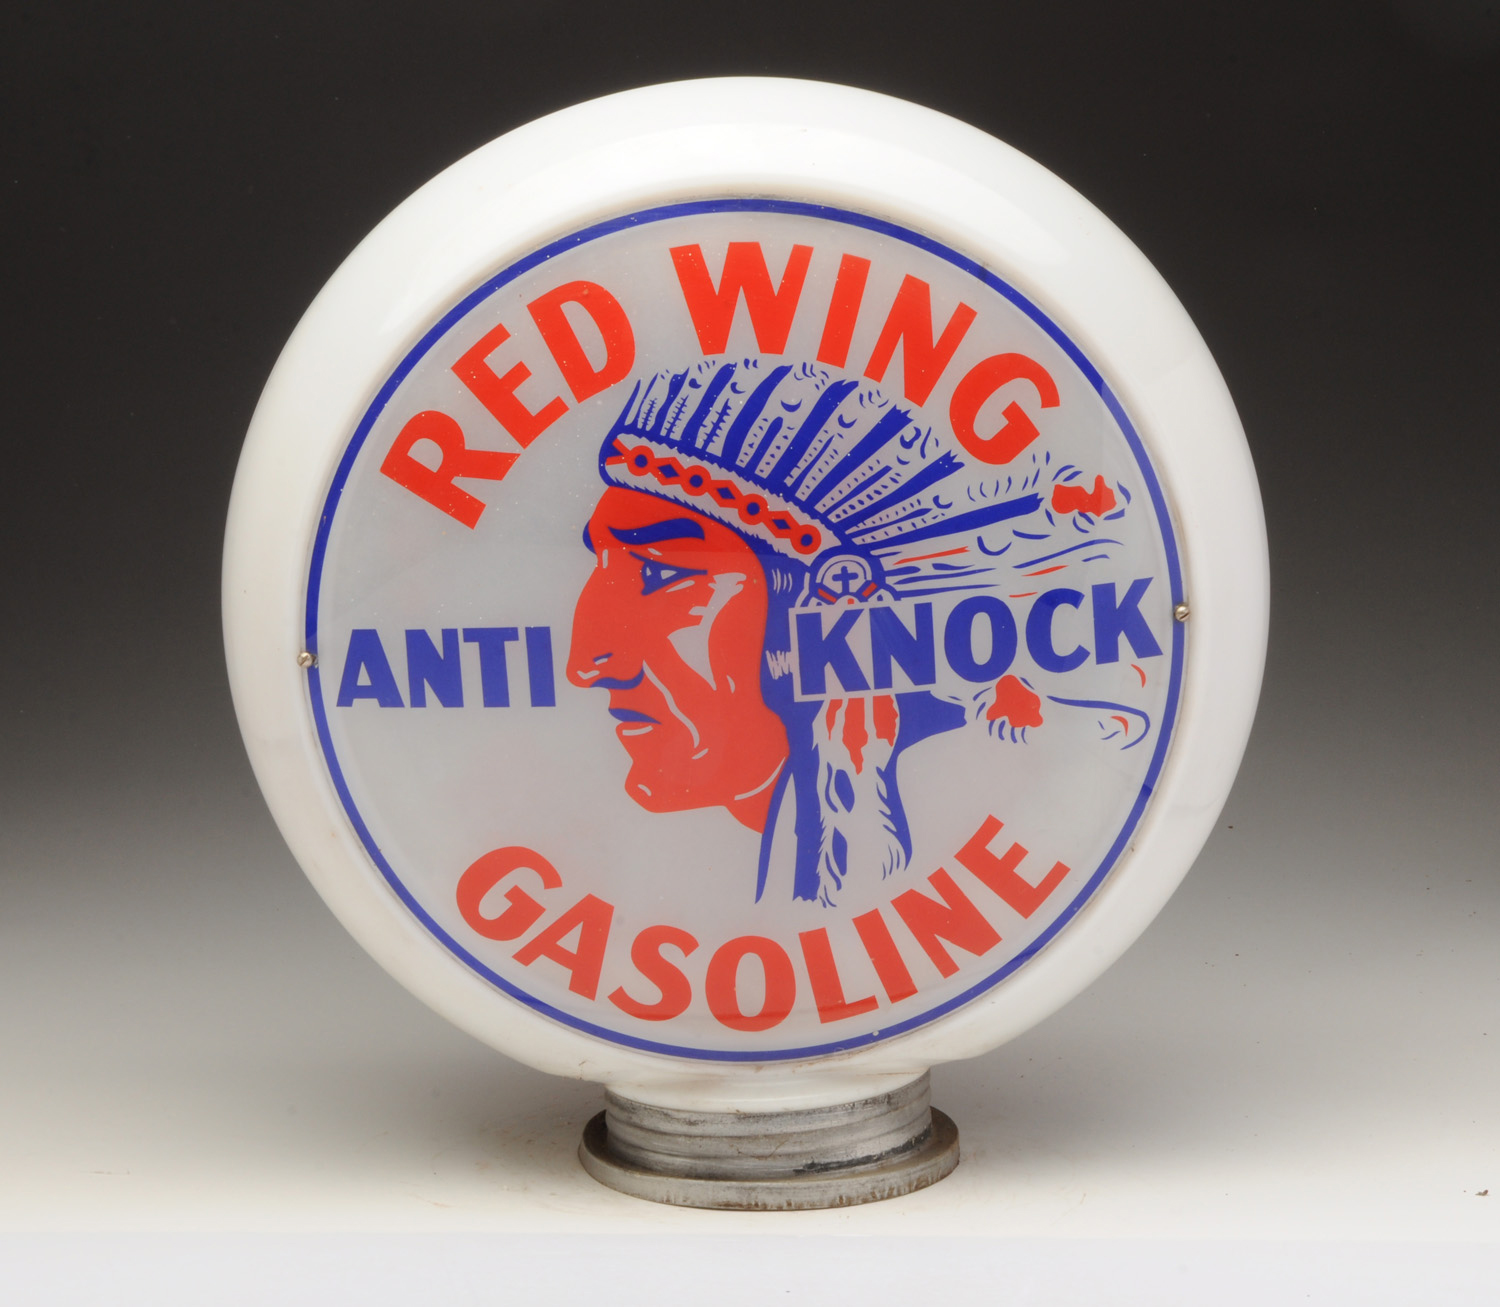 Lot #339	Red Wing Anti-Knock Gasoline Globe Lenses, estimated at $5,000-$8,000.